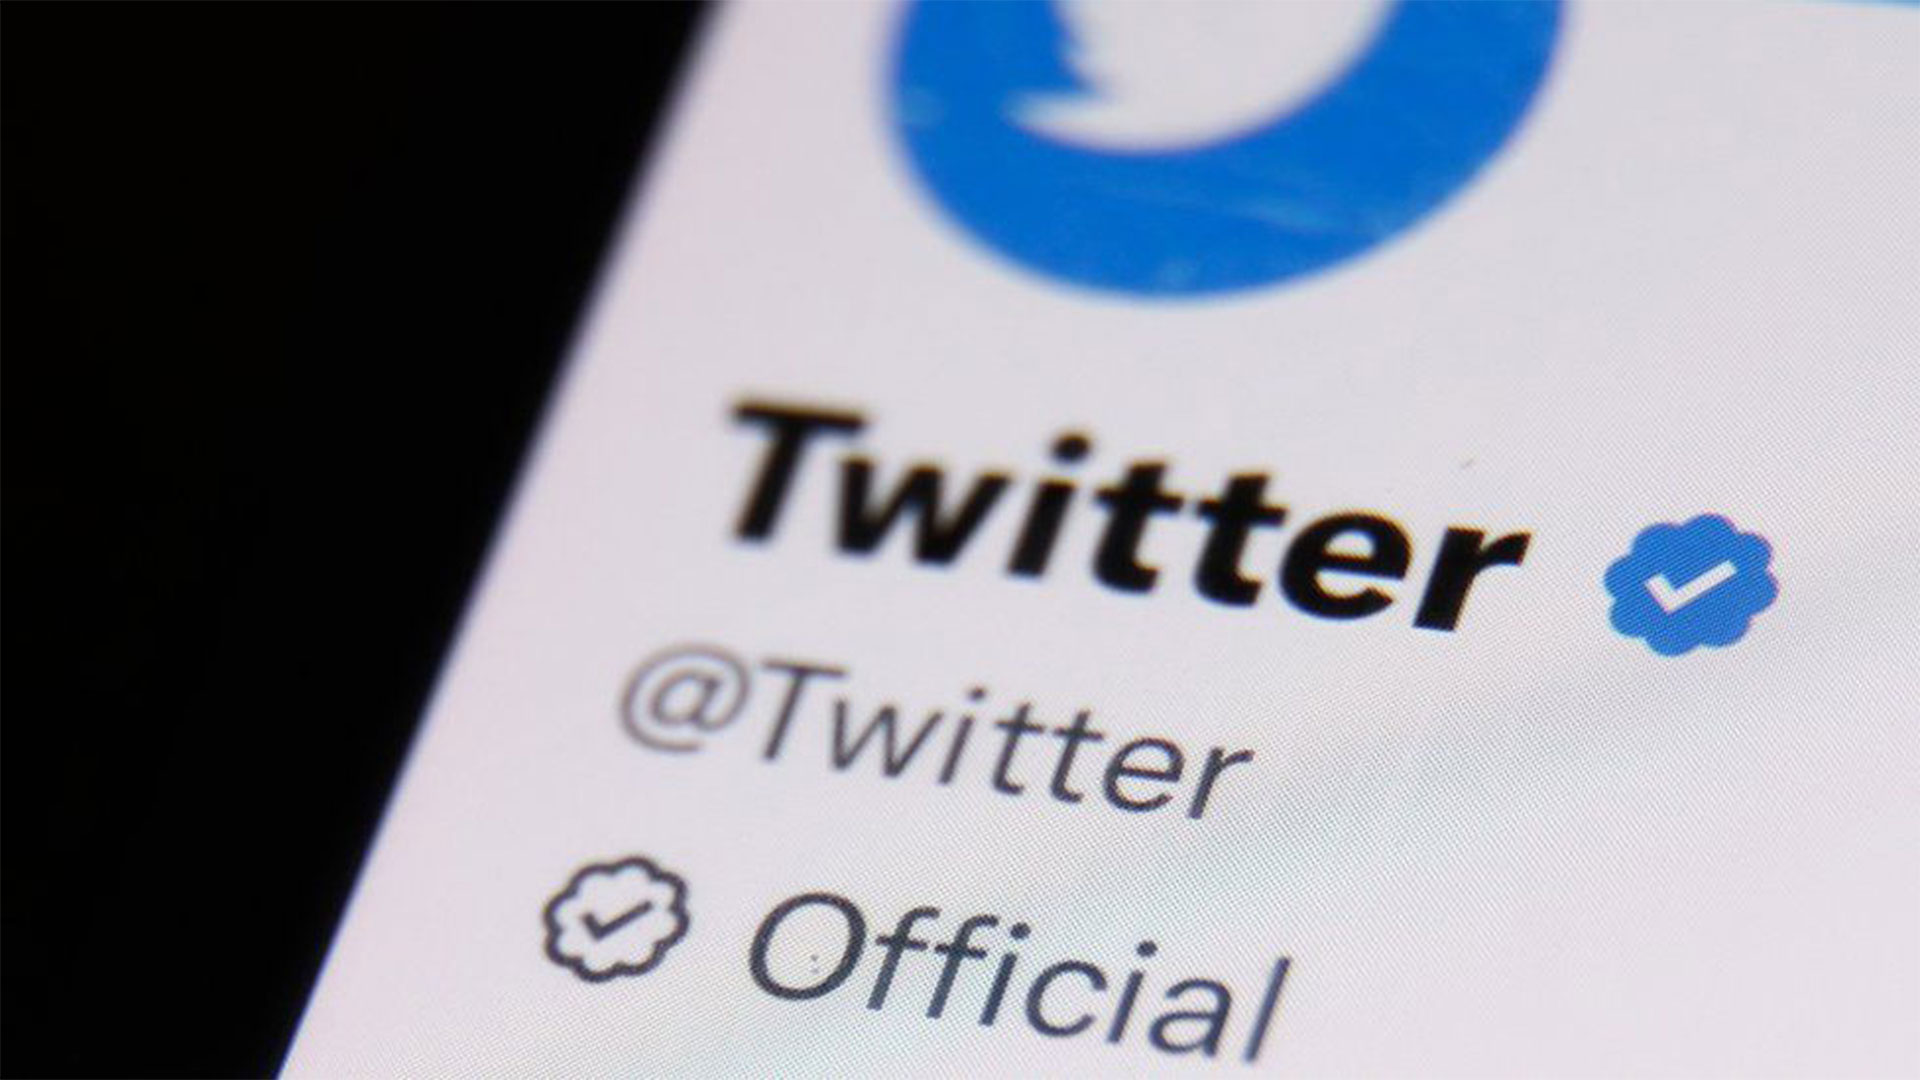 Twitter Blue: How to Get Verified on Twitter